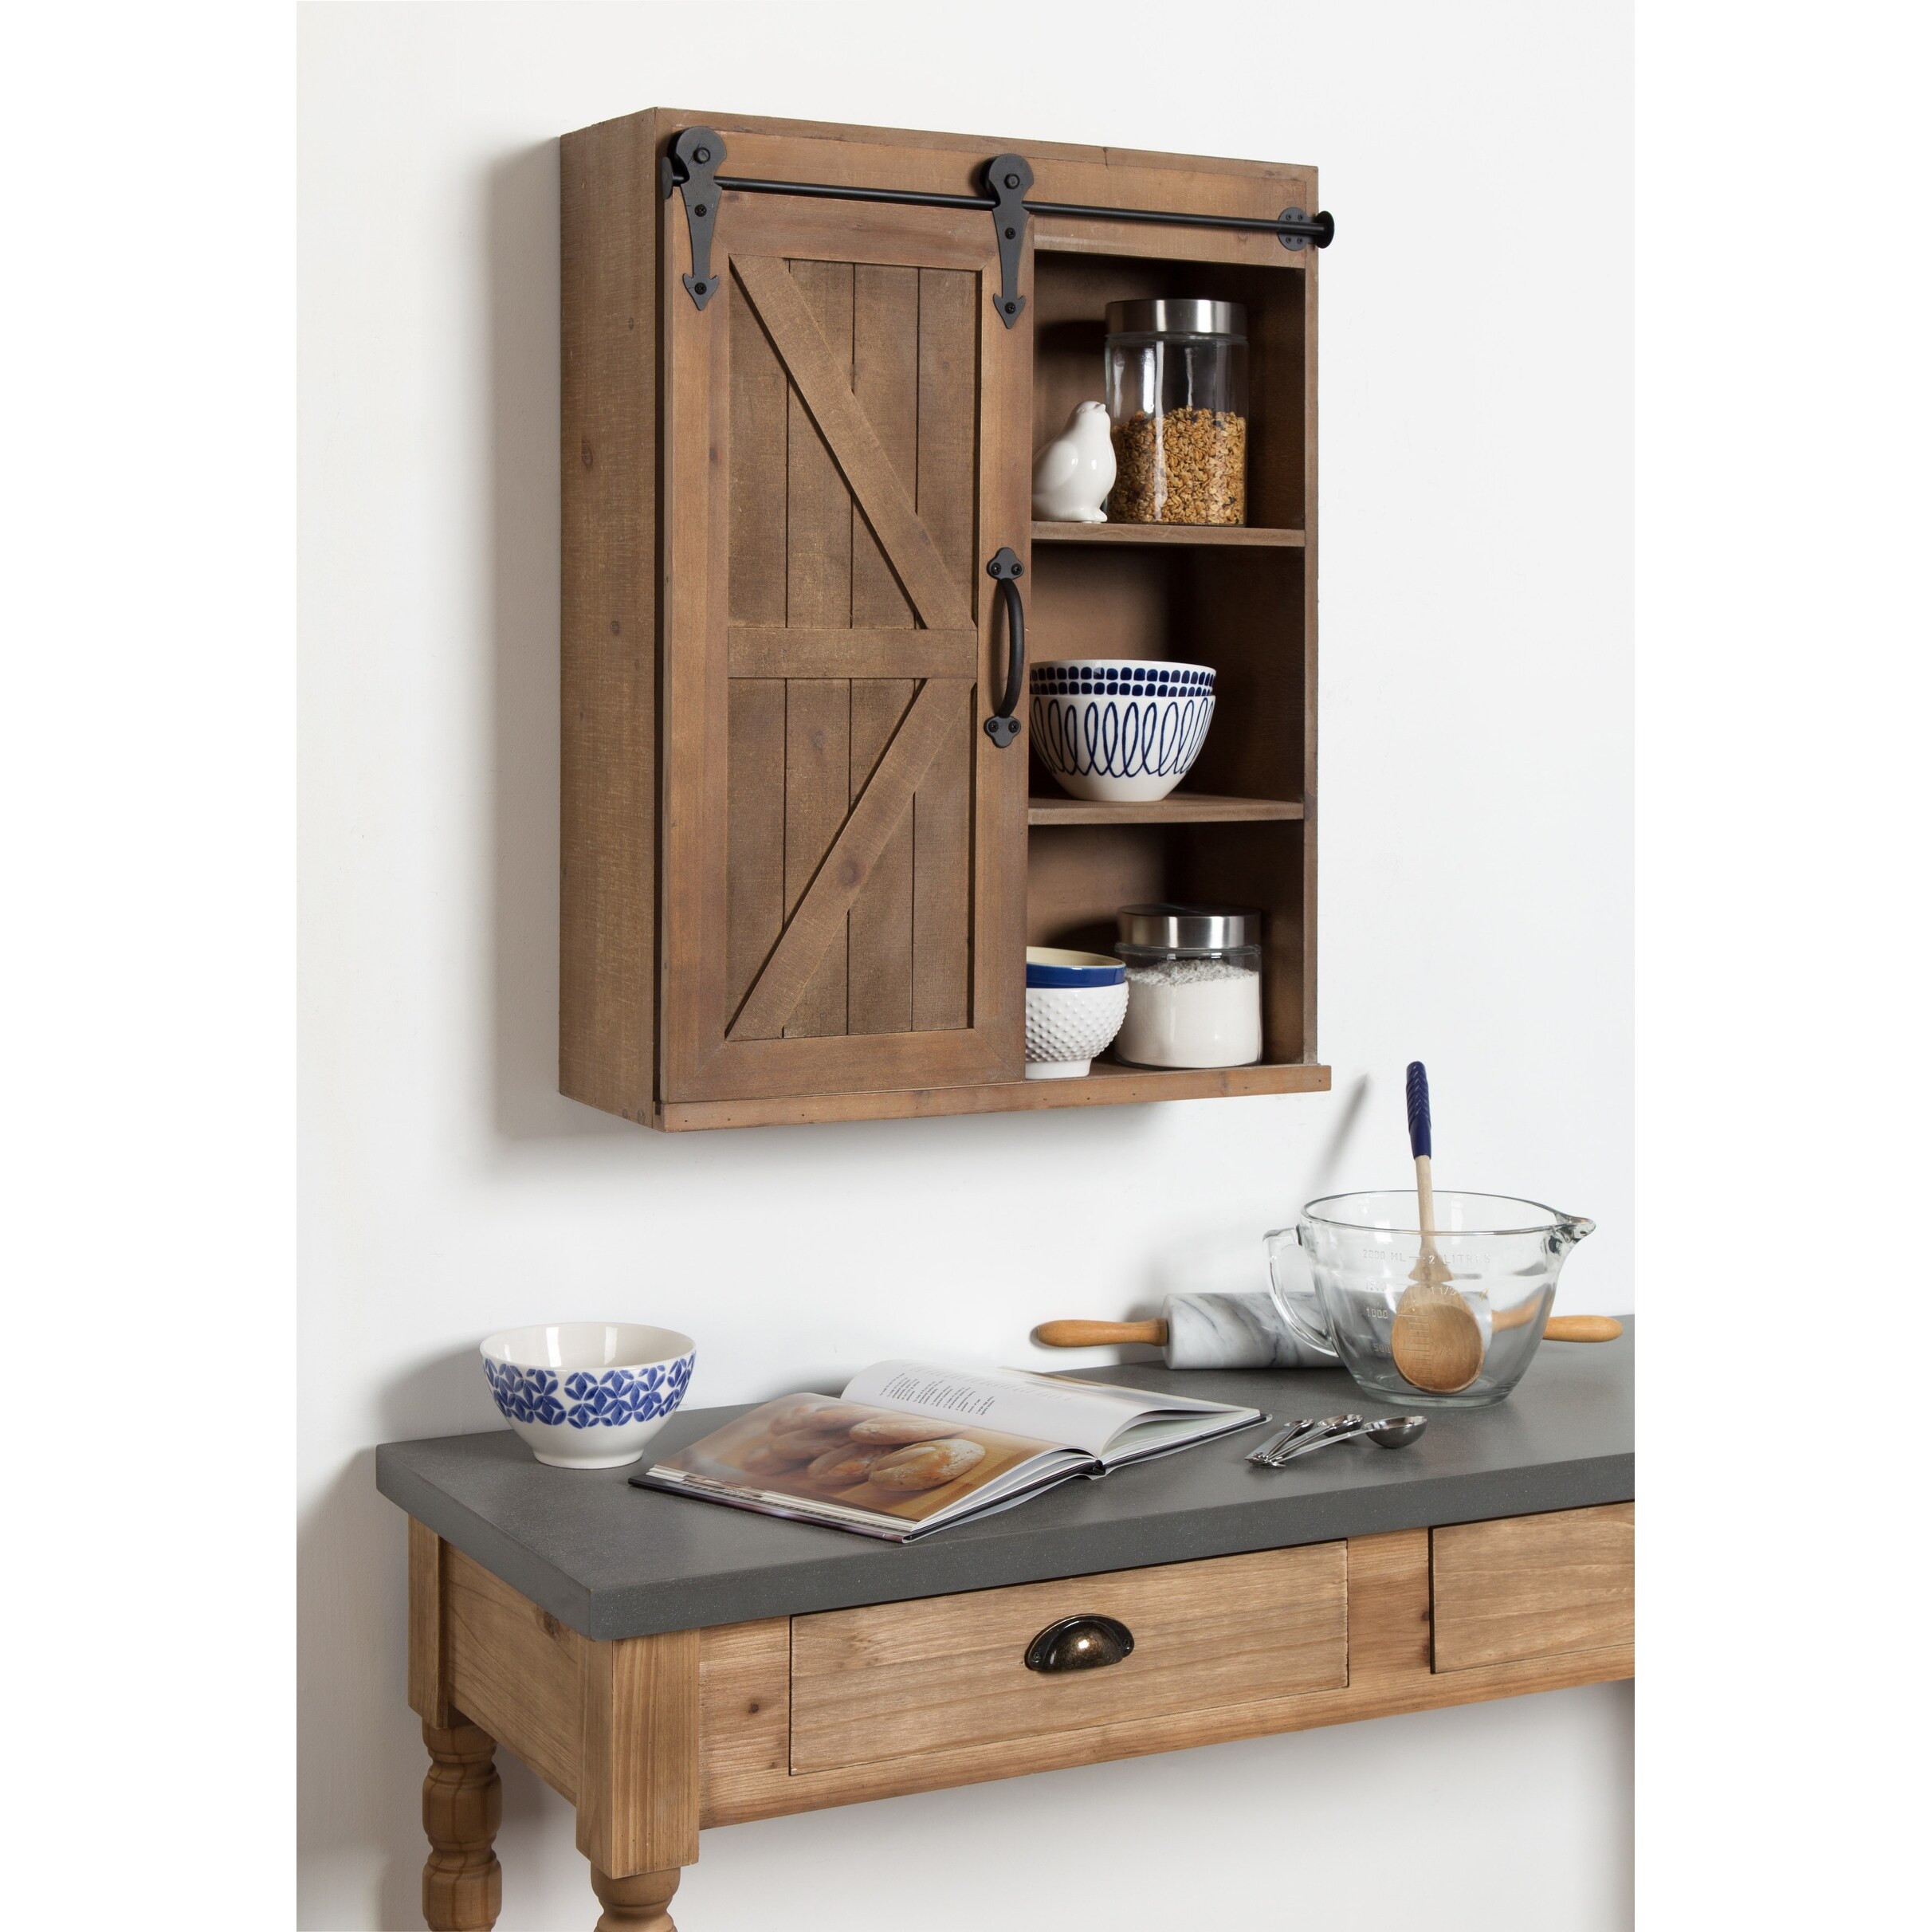 Decorative Wood Wall Storage Cabinet with 2 Sliding Barn Doors Rustic Gray  - Kate & Laurel All Things Decor